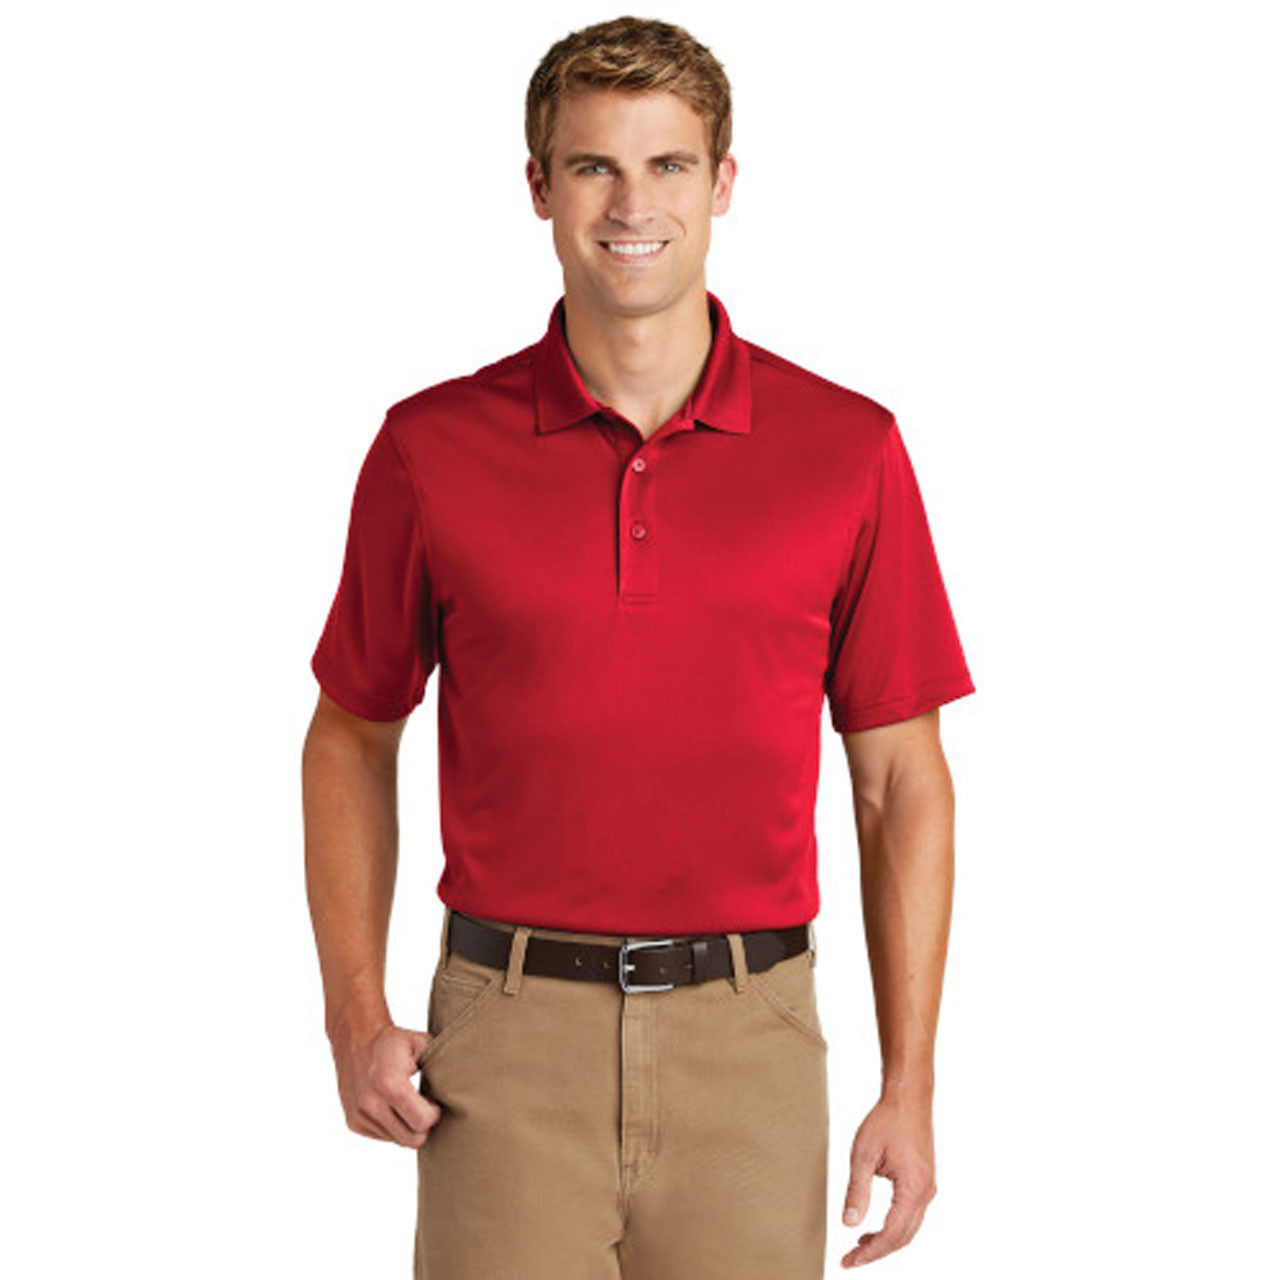 Does the men's red polo and khaki pants have a specific collar type?